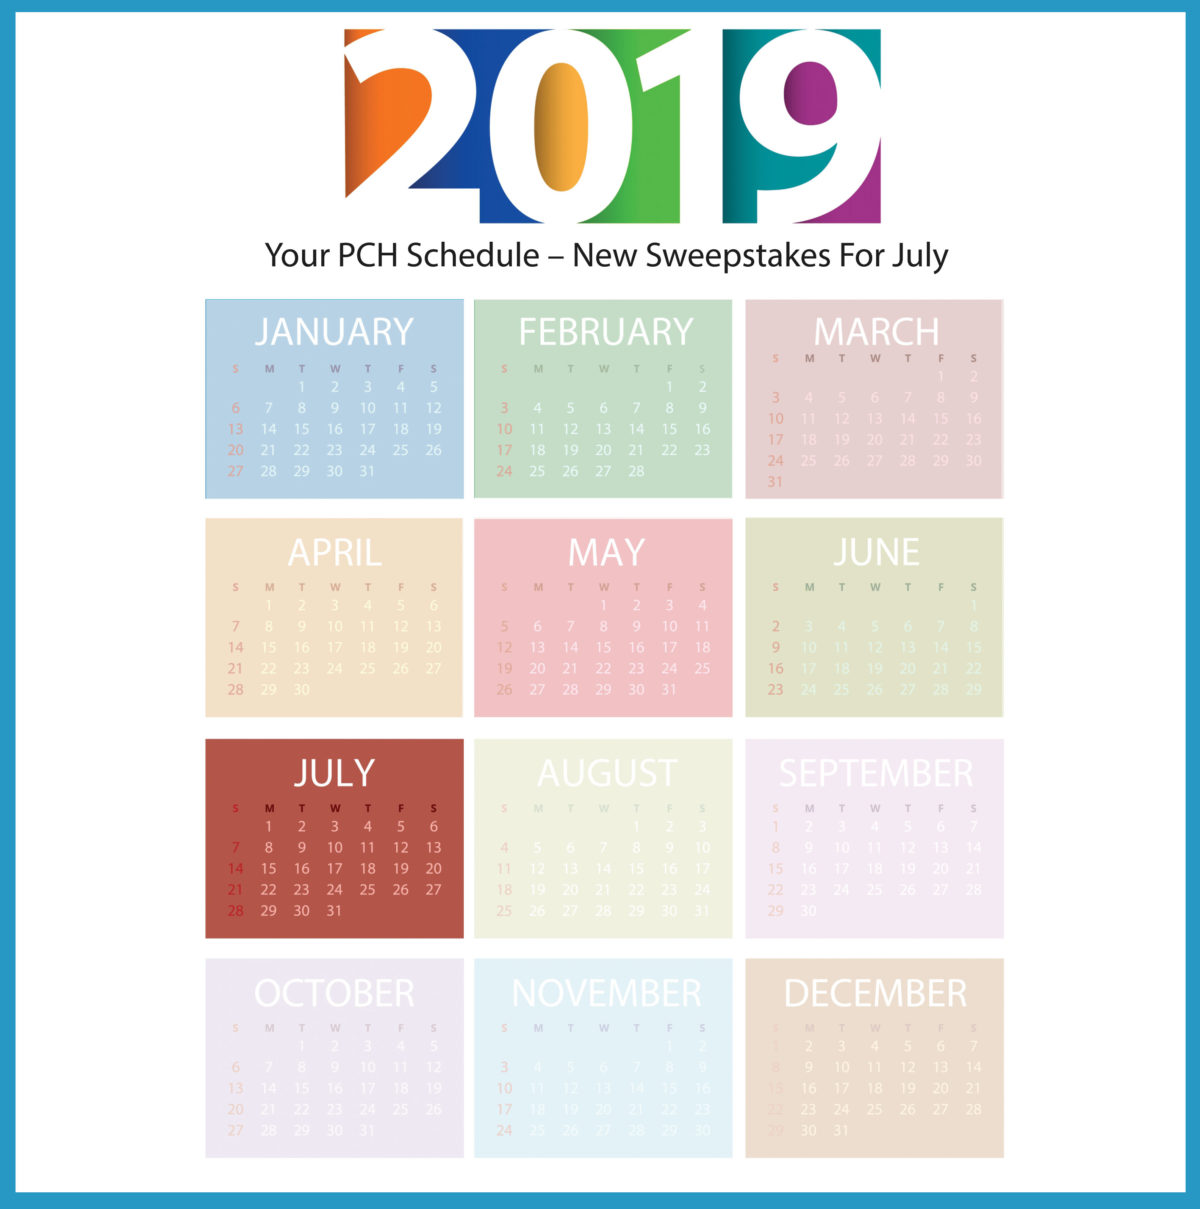 Your PCH Schedule – New Sweepstakes for July